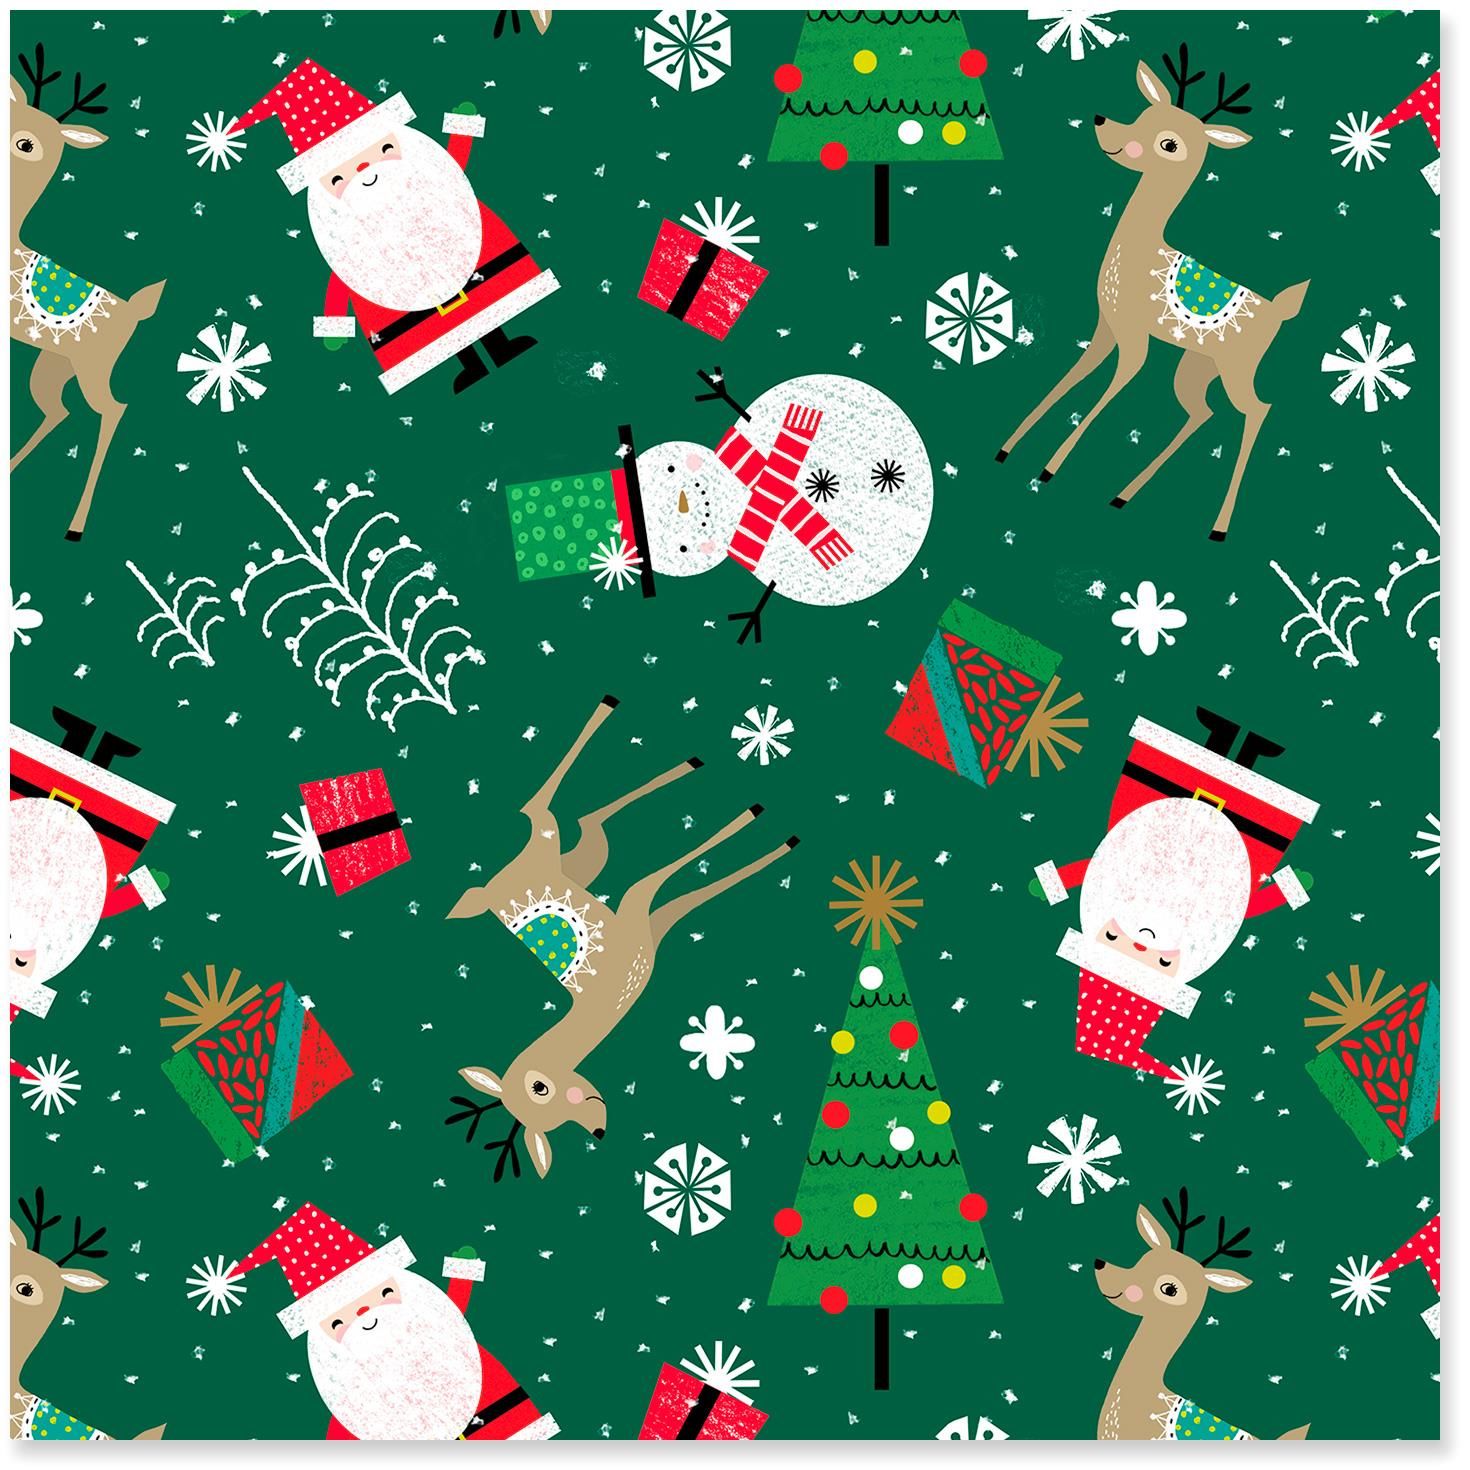 Jumbo Christmas Wrapping Paper Roll - Wrapping Paper - Hallmark